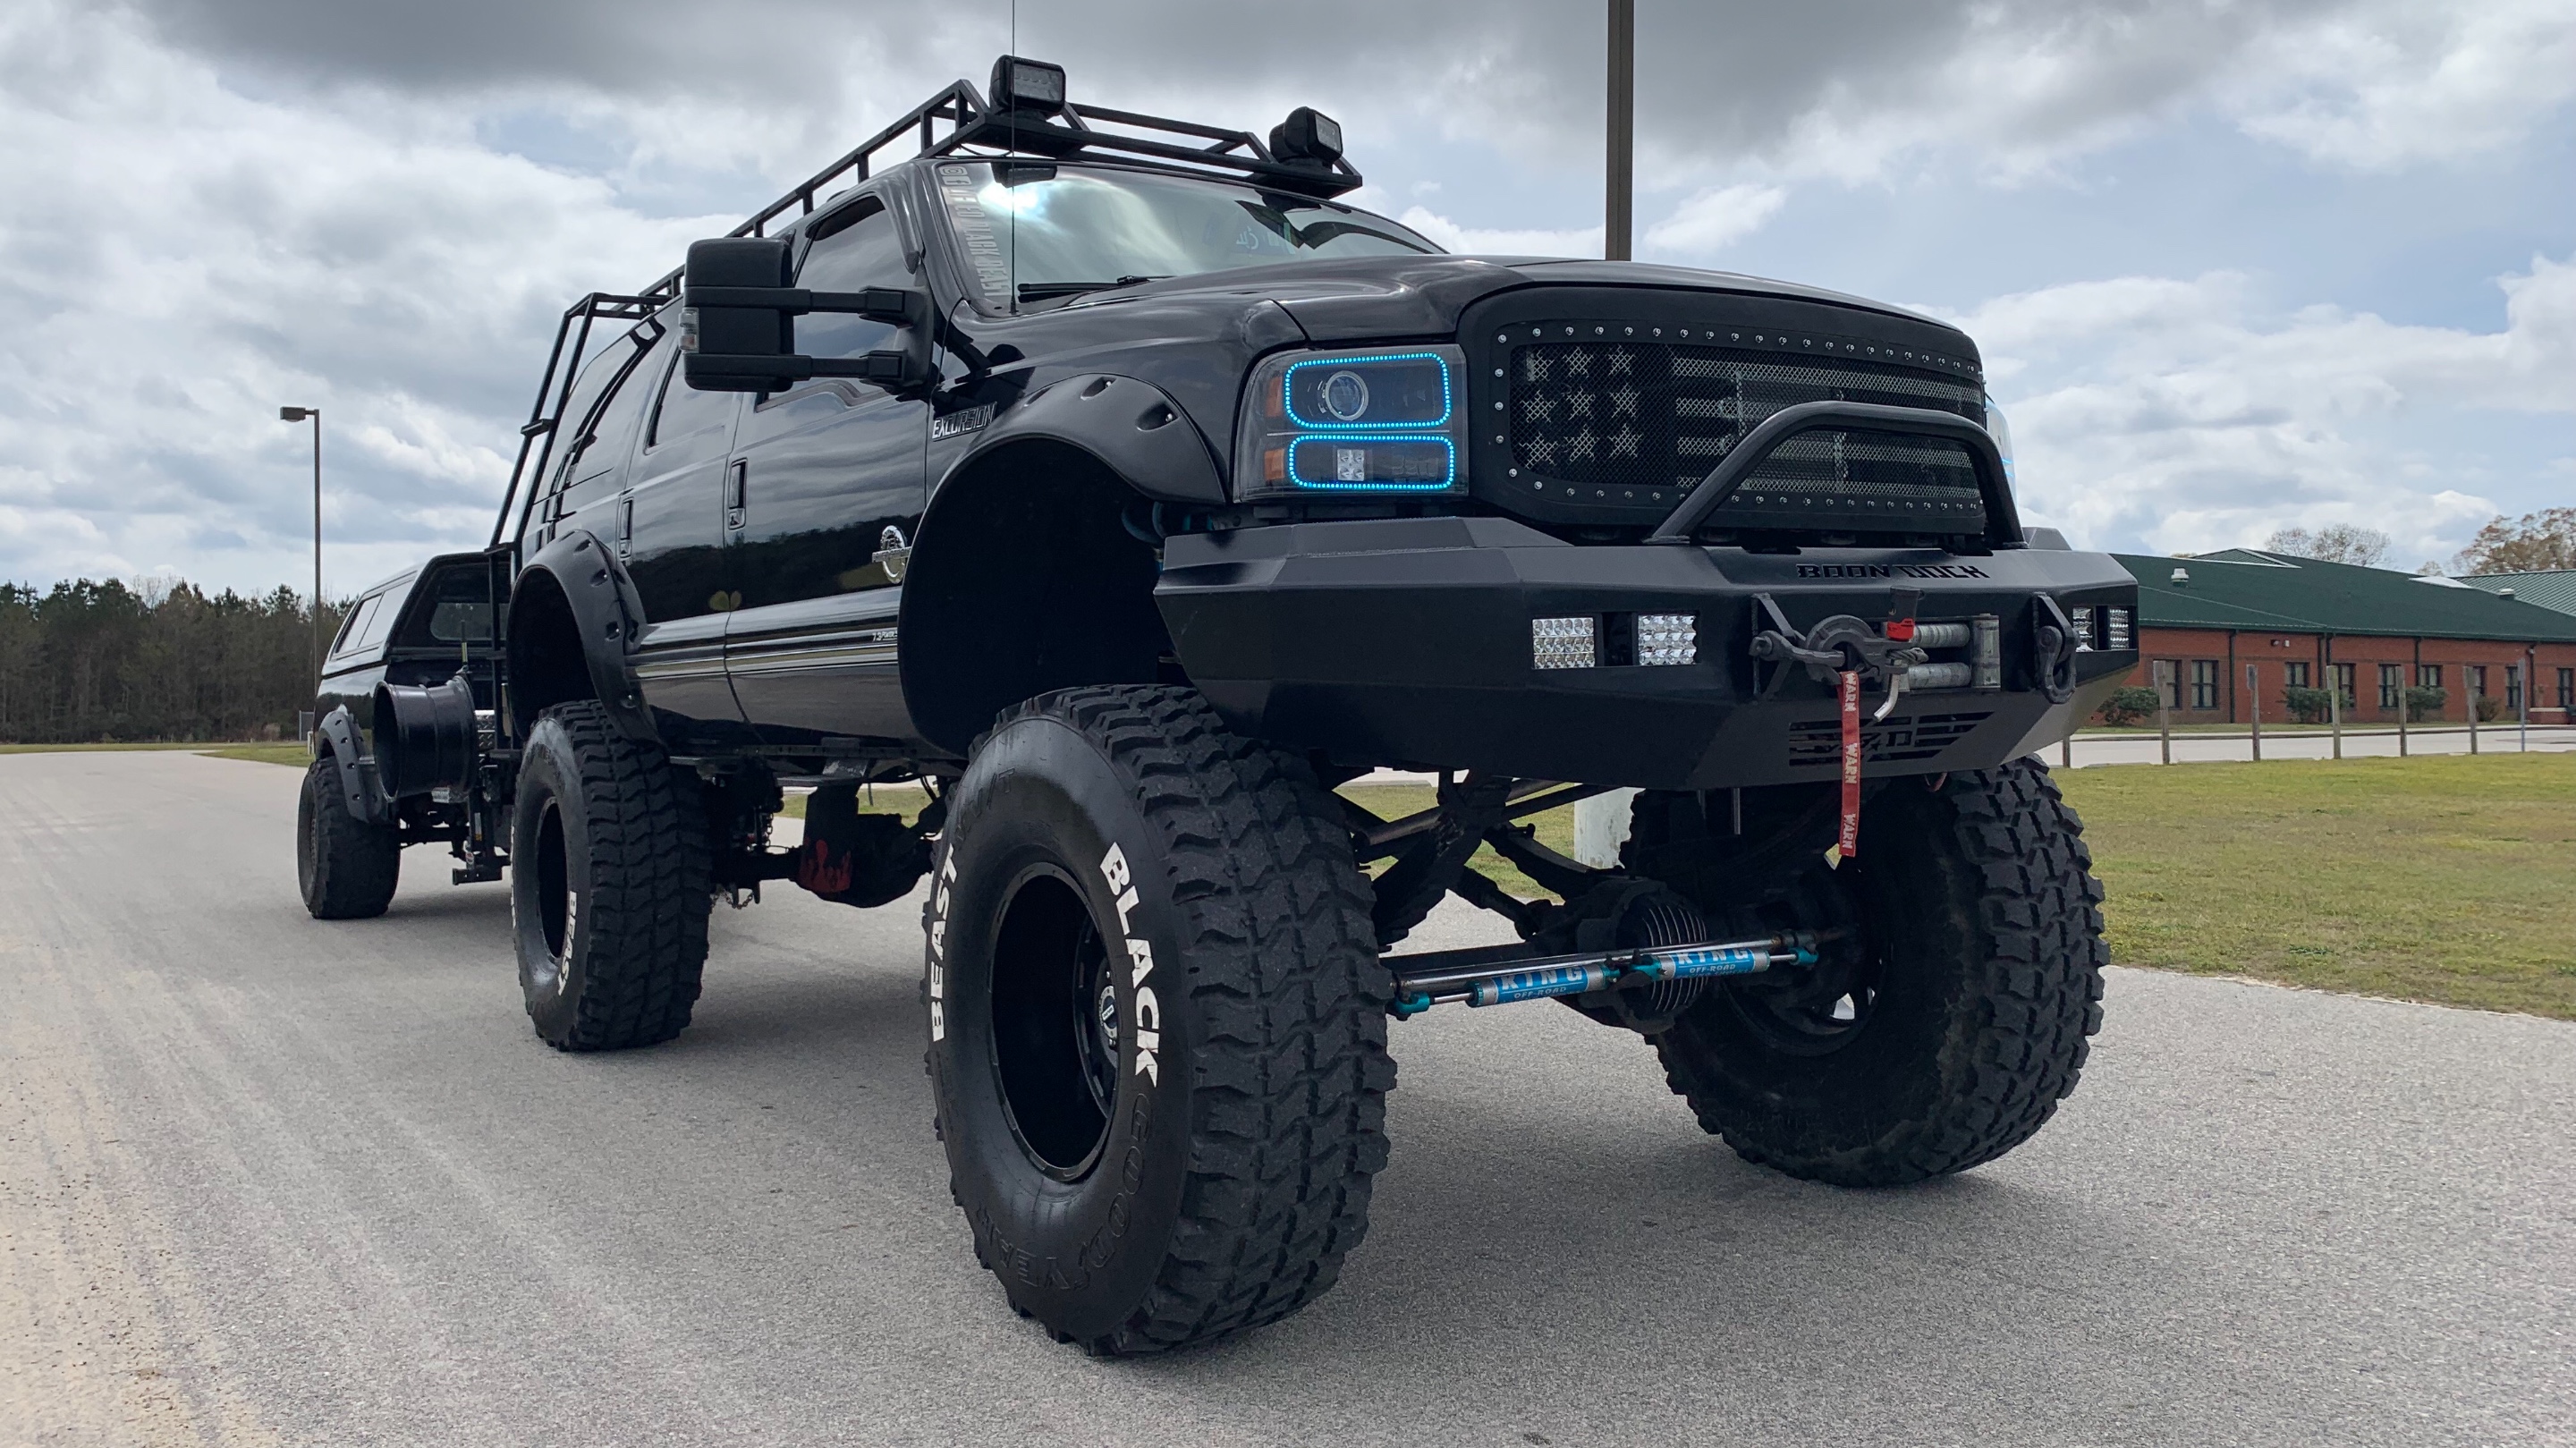 2002 ford excursion lifted